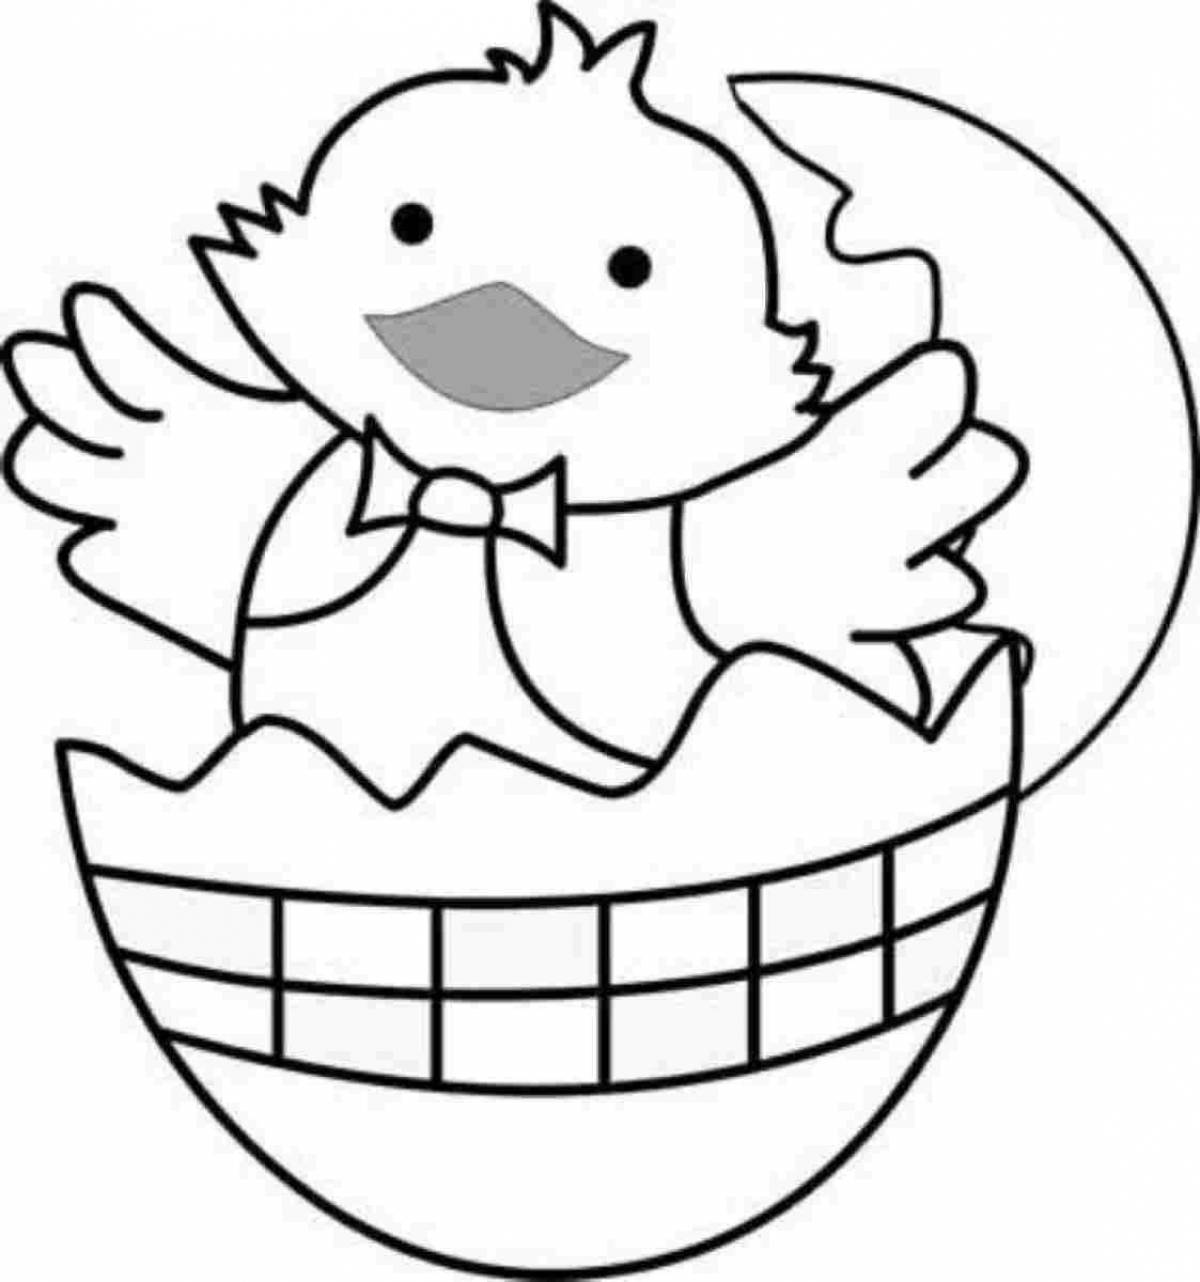 Sweet chick in egg coloring page